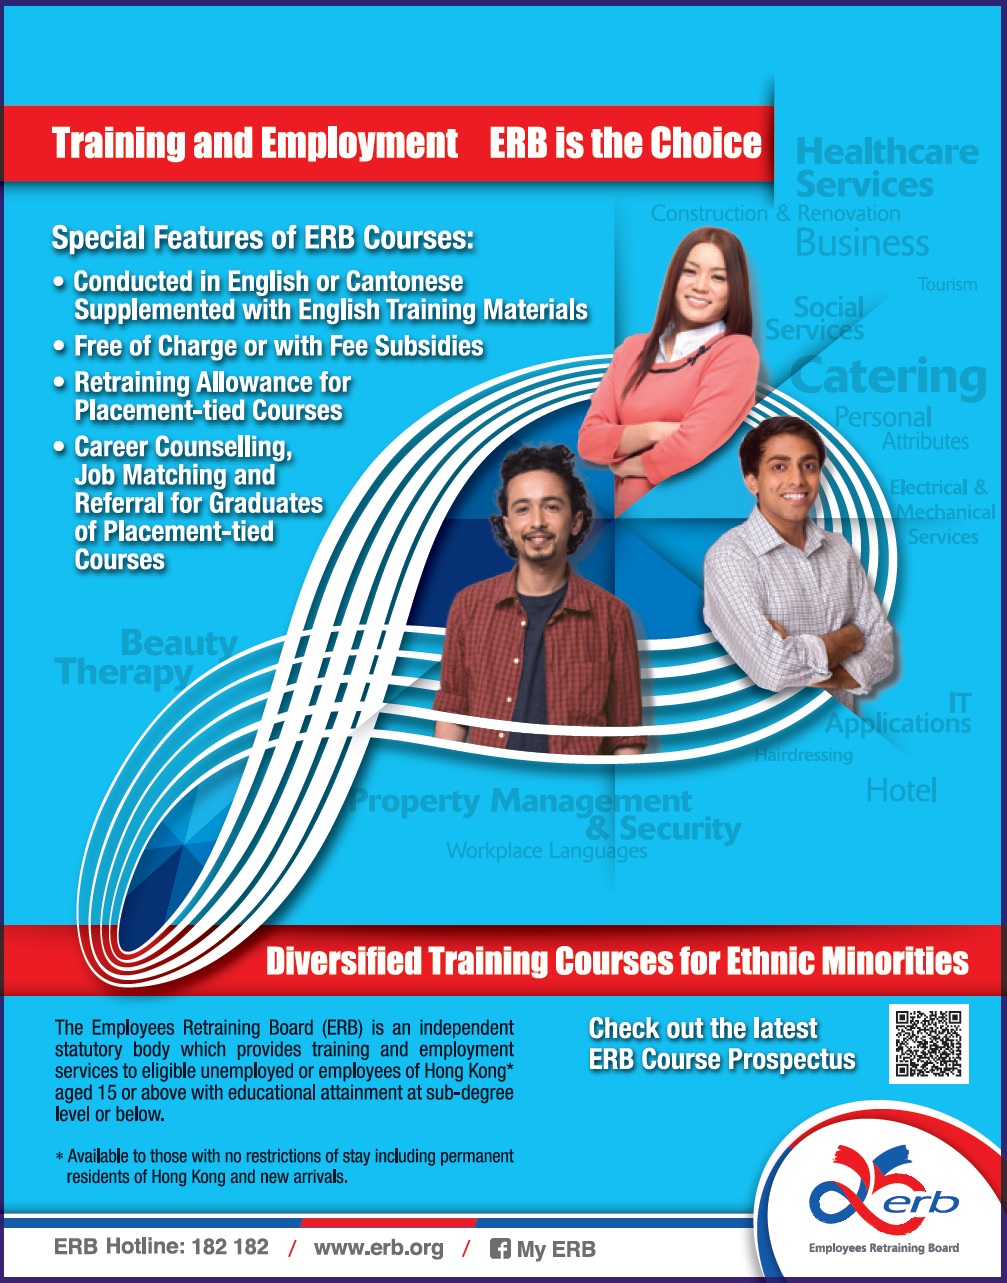 Click here to download the image version of newspaper advertisement of Training for Ethnic Minorities (November 2017) (English)